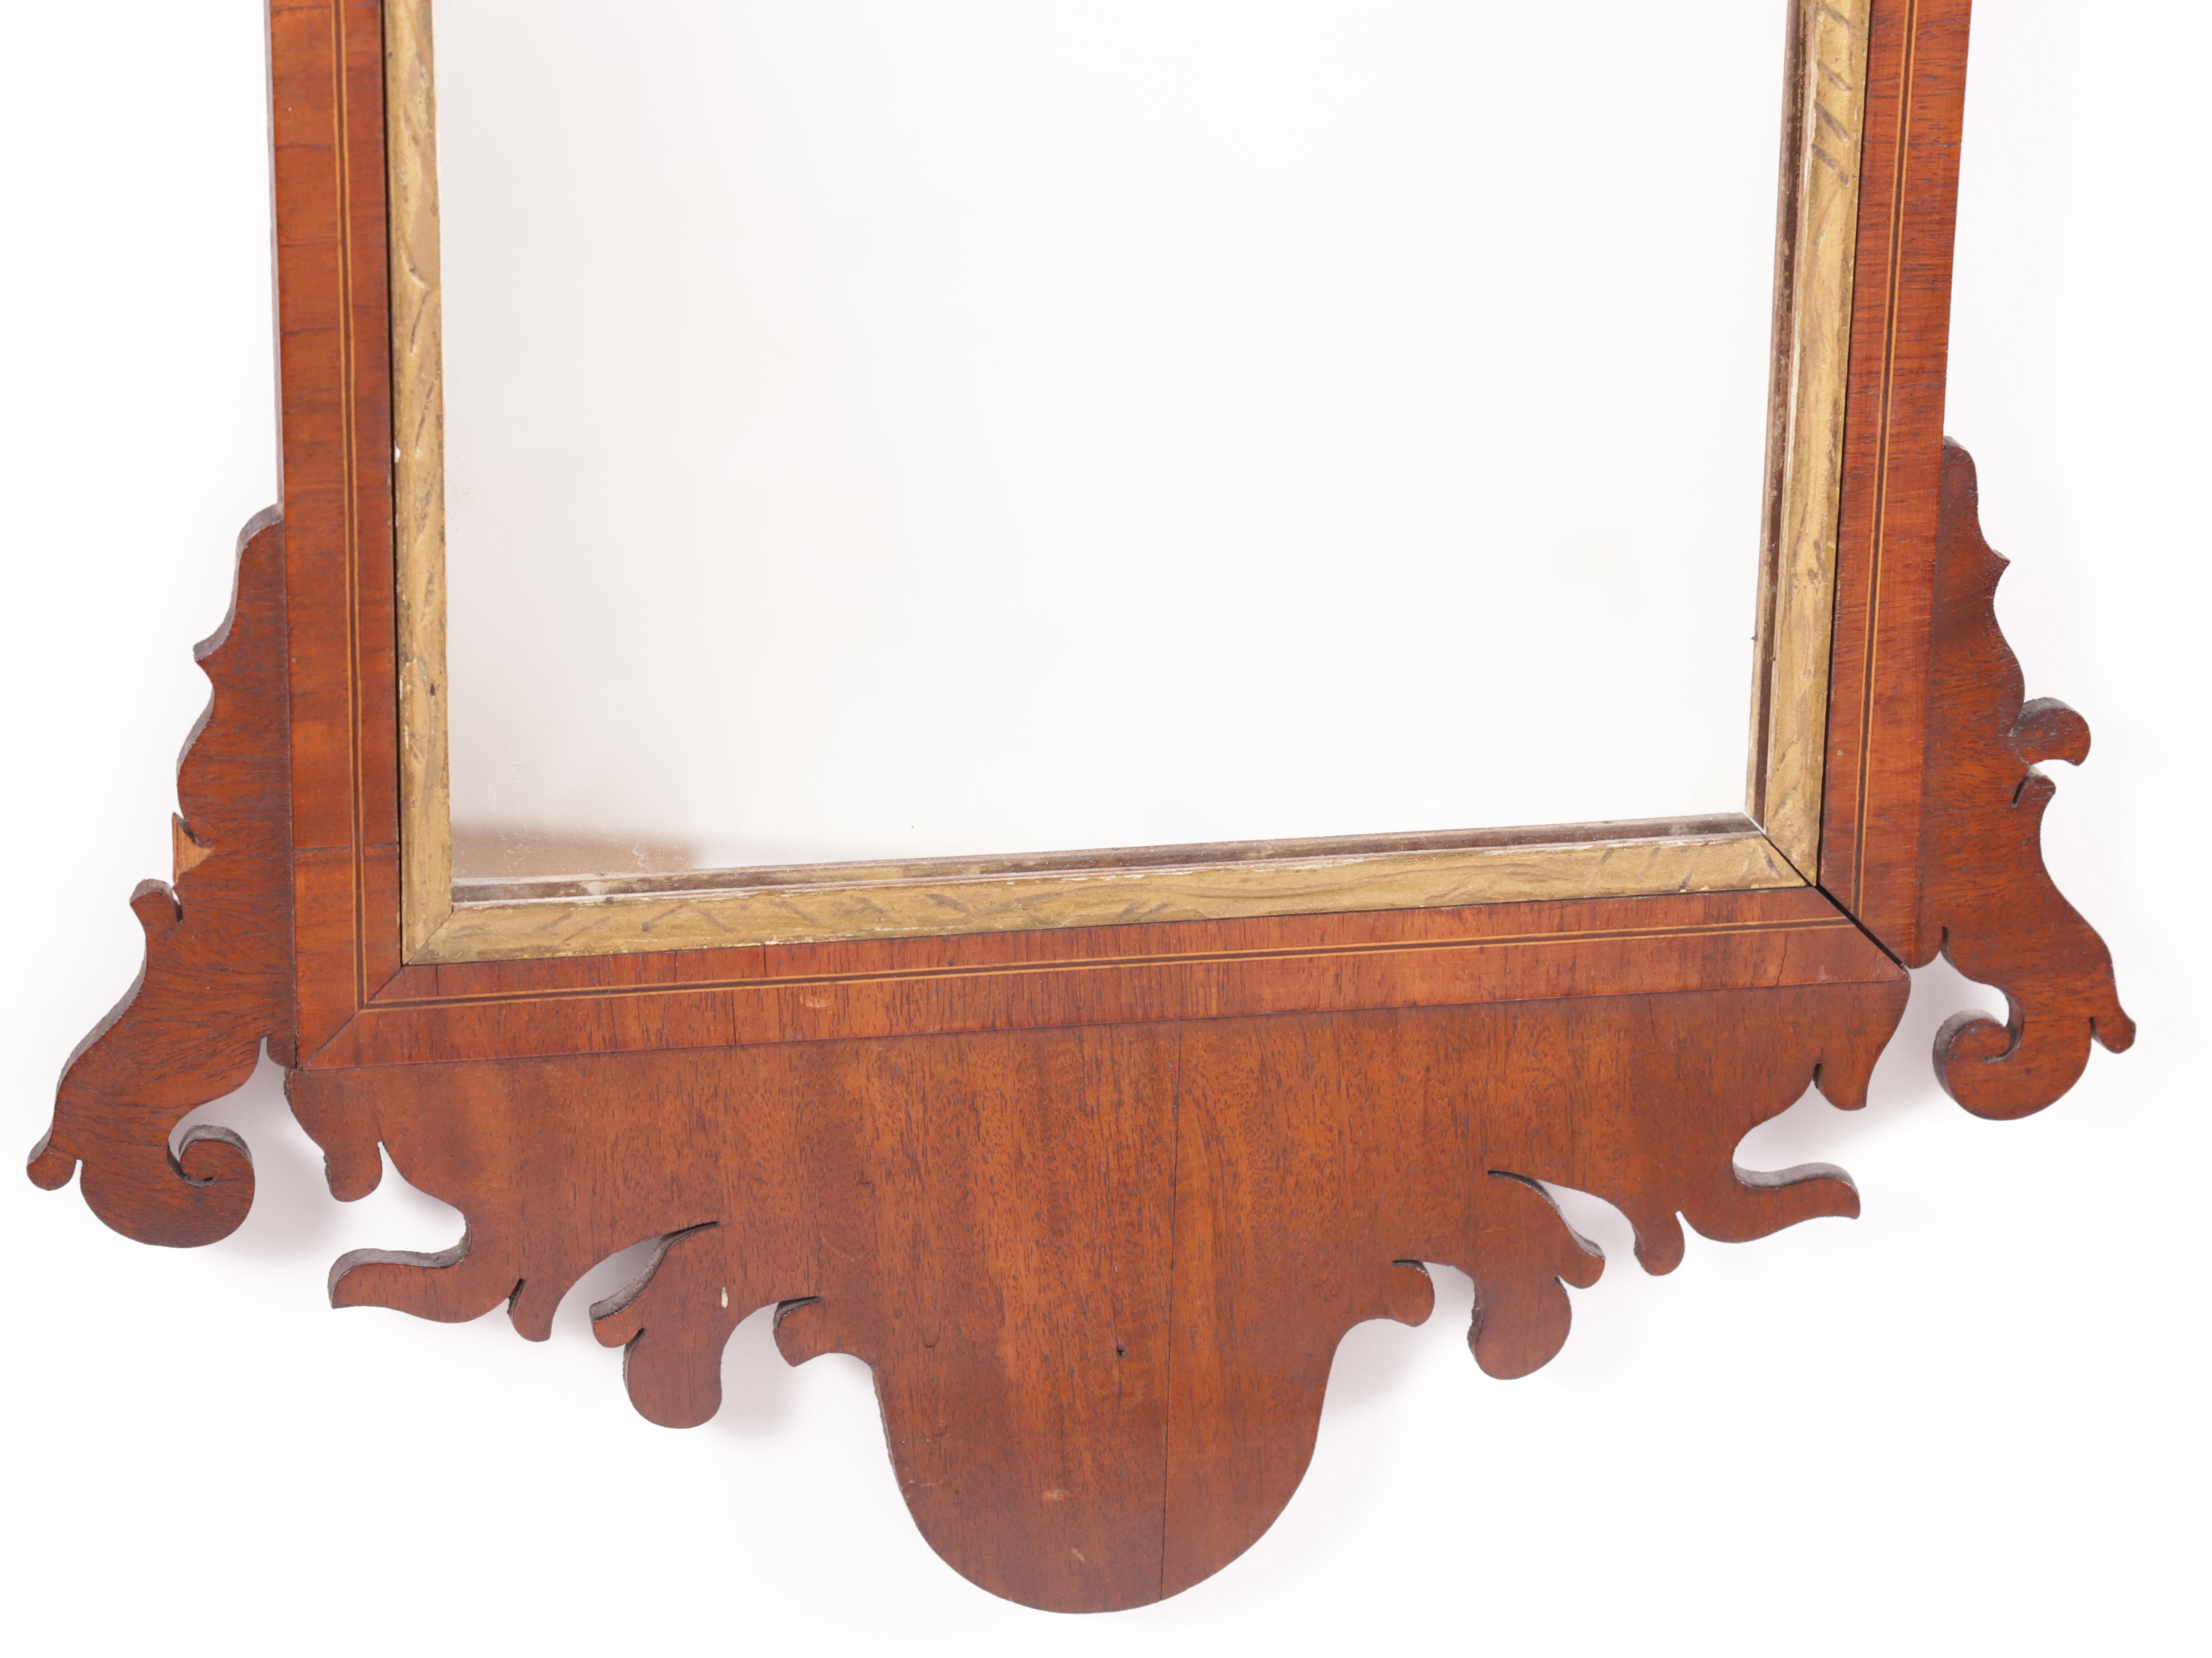 Two Chippendale Mahogany Mirrors, One Early 19th Century